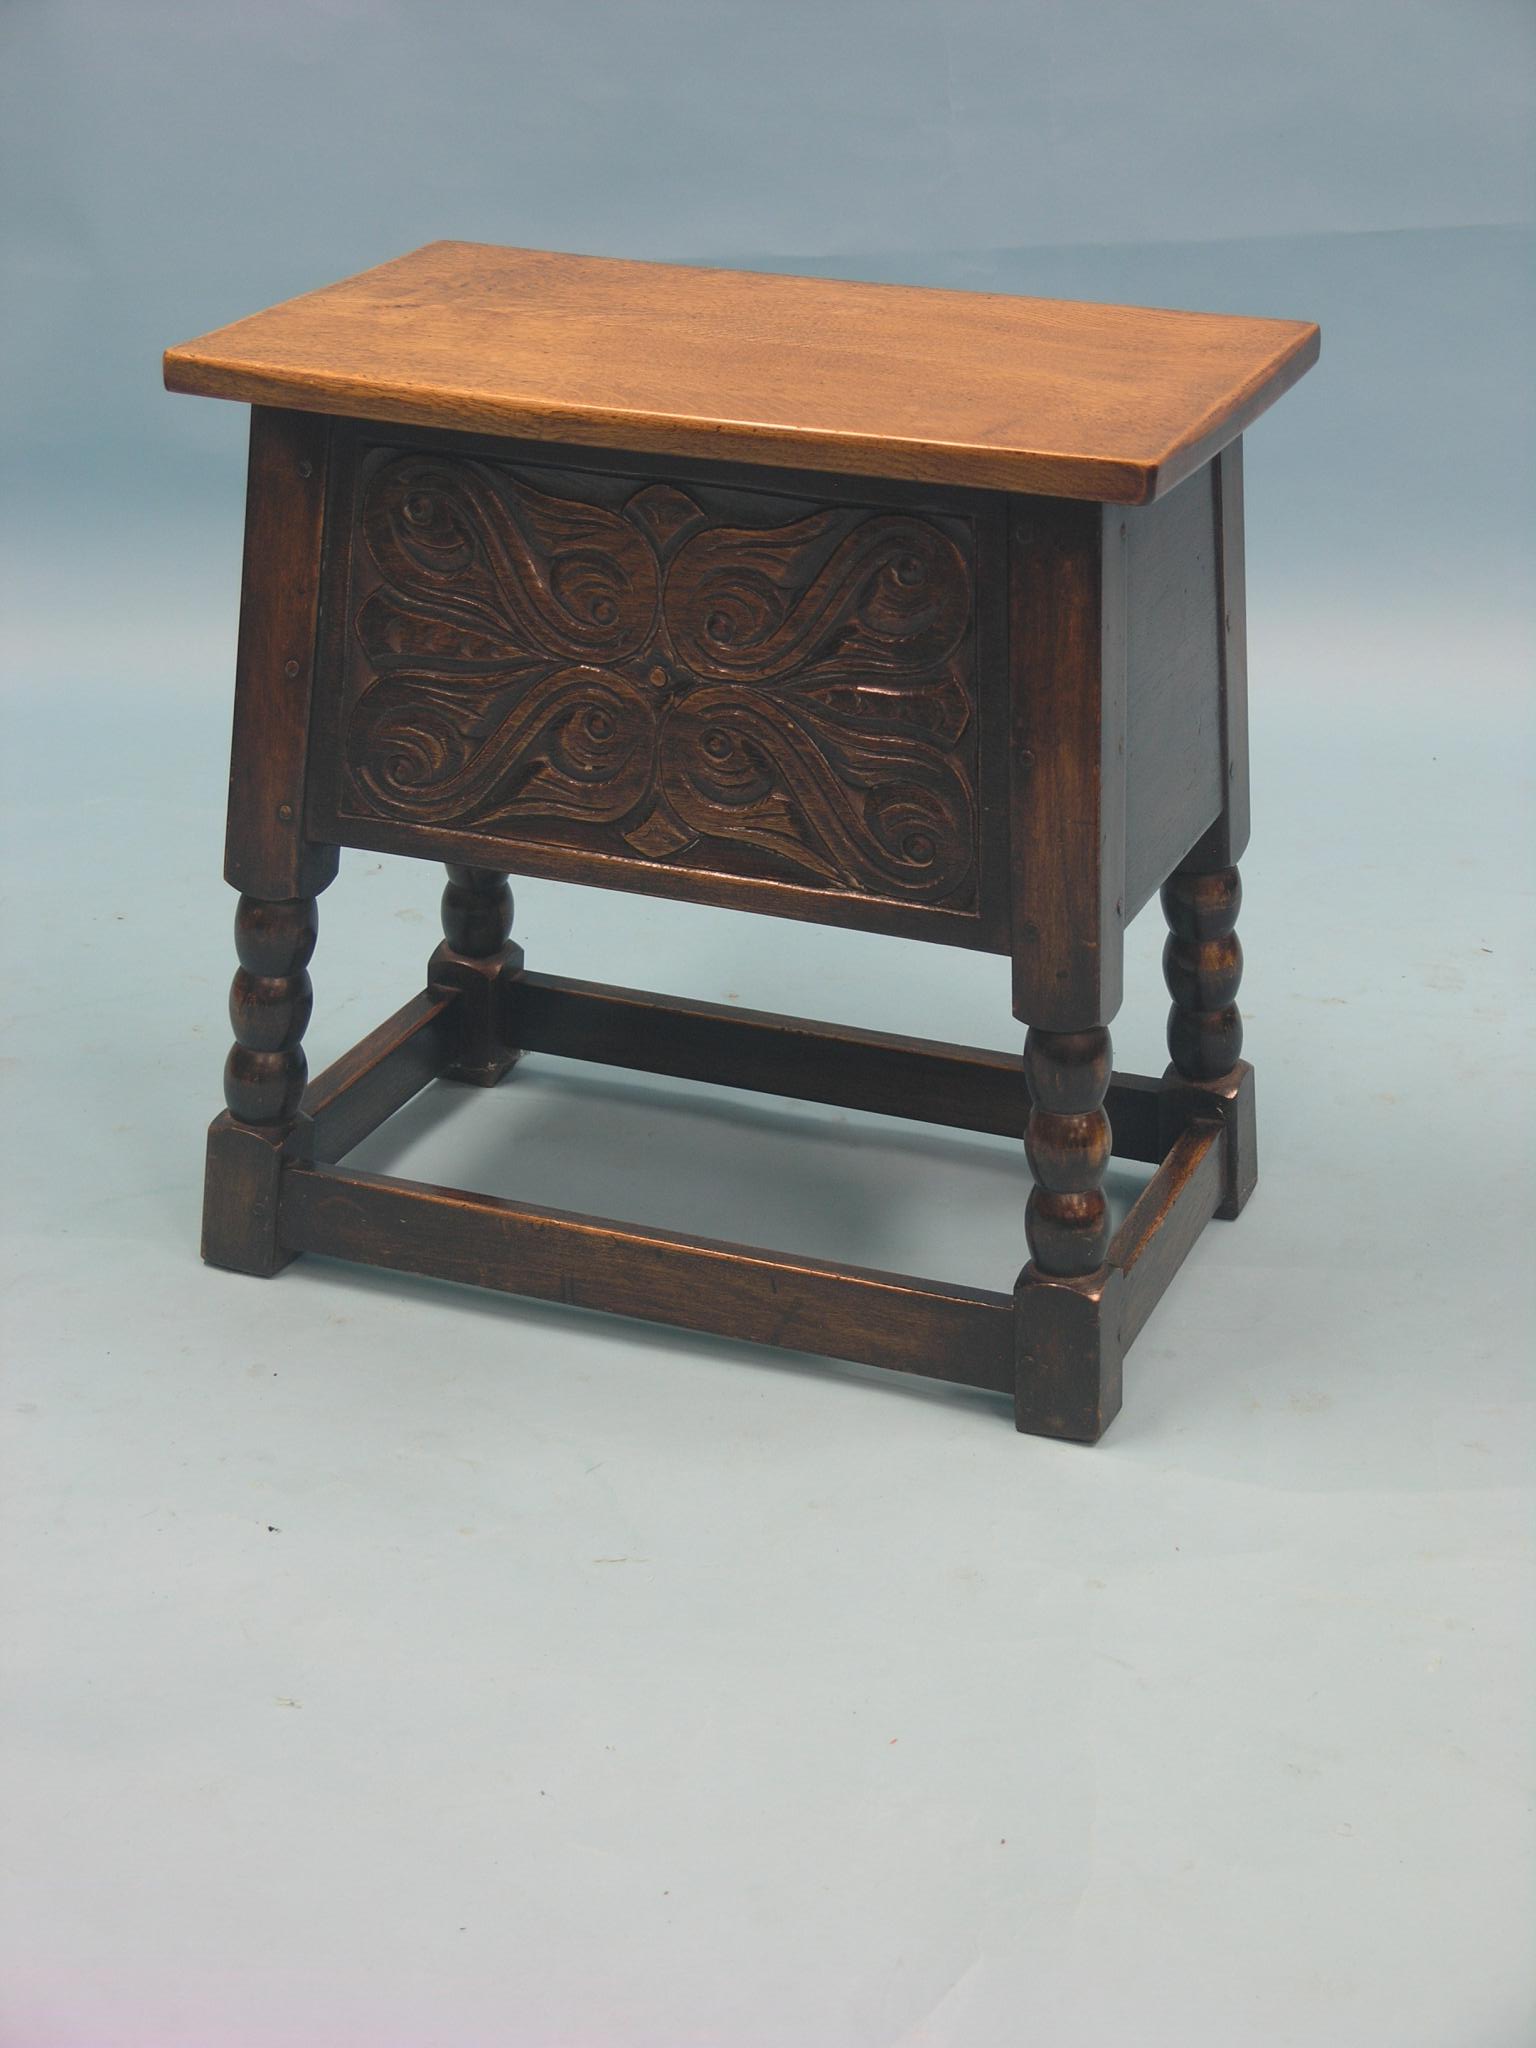 A Reprodux oak box-stool, frontage carved with leaf scrolls on ball-turned legs, 1ft. 7in. £30-40